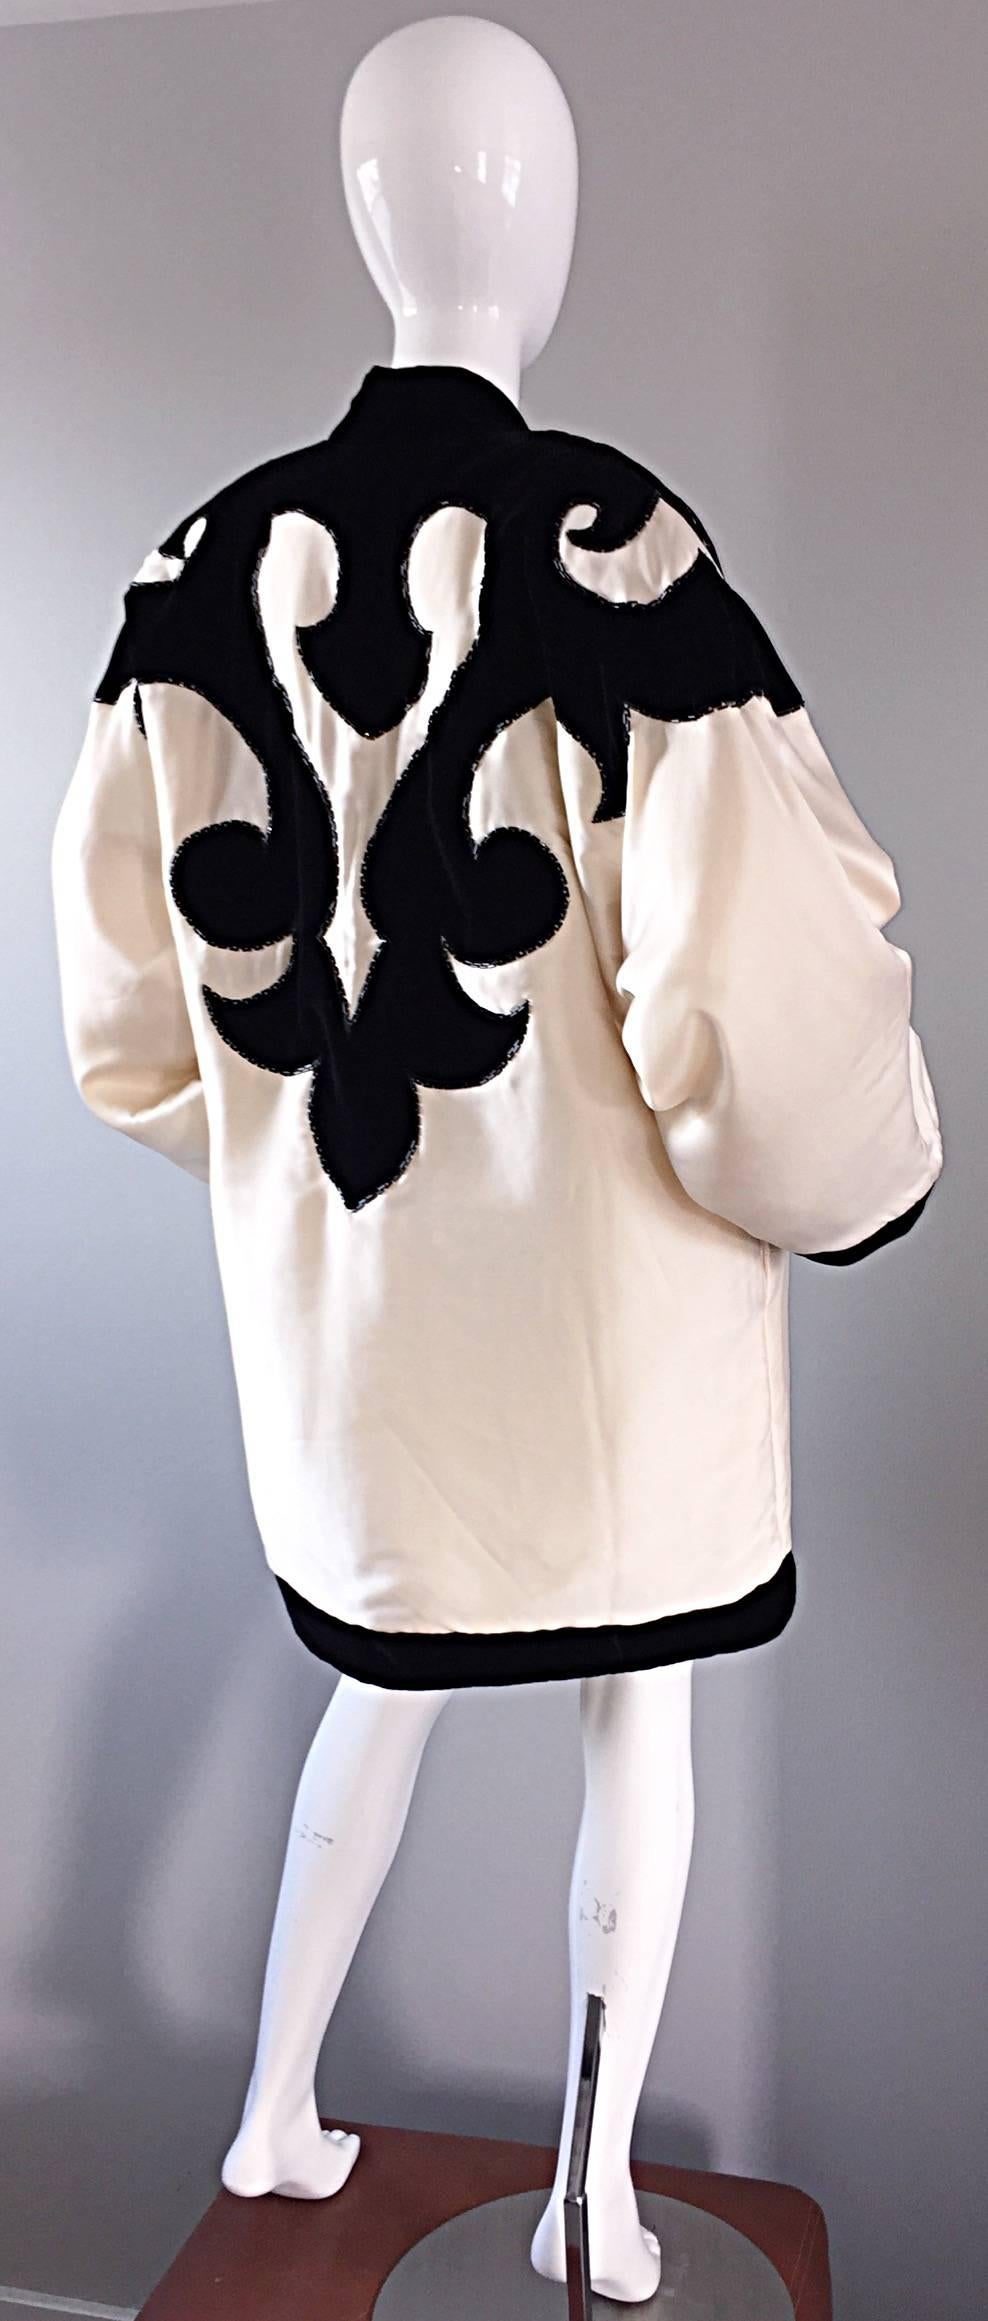 Amazing RARE vintage BILL TICE ivory and black kimono jacket! Ivory silk, with black silk velvet, encrusted with black beads. Such a chic silhouette, with an 'Ace of Spades' theme. Wide bell sleeves. Looks great with jeans, yet perfect paired over a